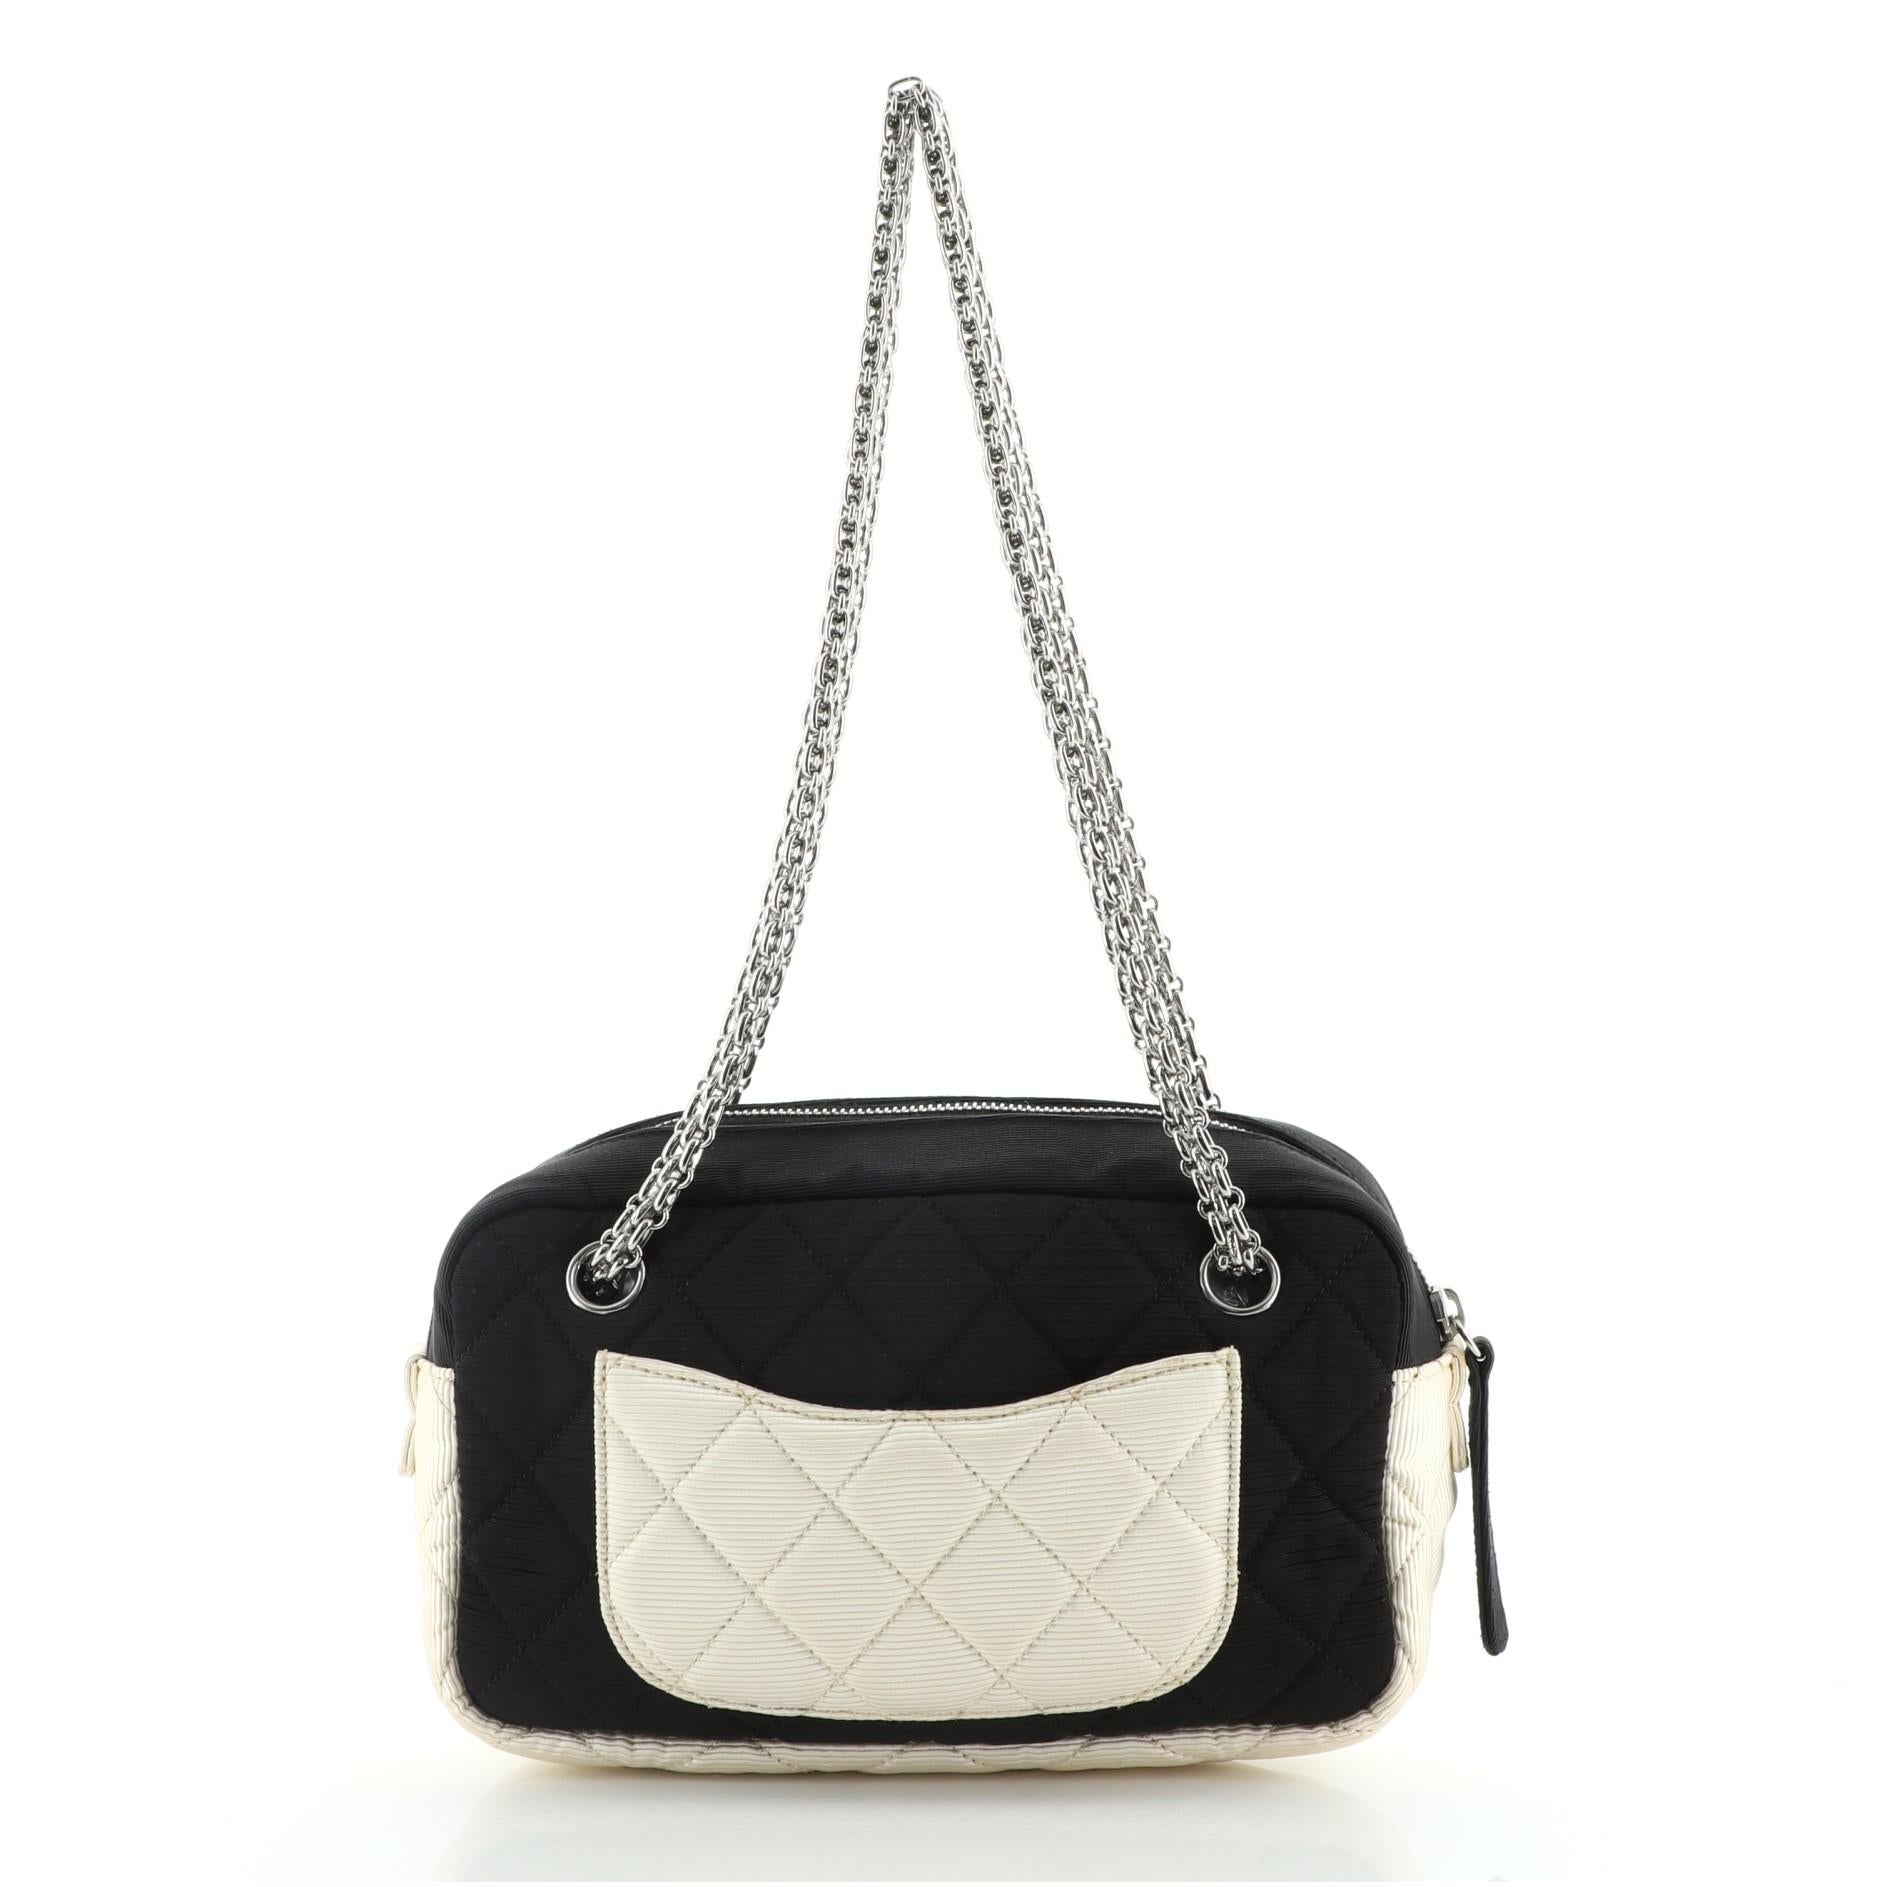 Chanel Reissue Camera Bag Quilted Grosgrain Small
Black Neutral Grosgrain

Condition Details: Odor in interior. Creasing on exterior, moderate discoloration and stains on rear pocket and base trim, scratches on hardware.

59067MSC

Height 5